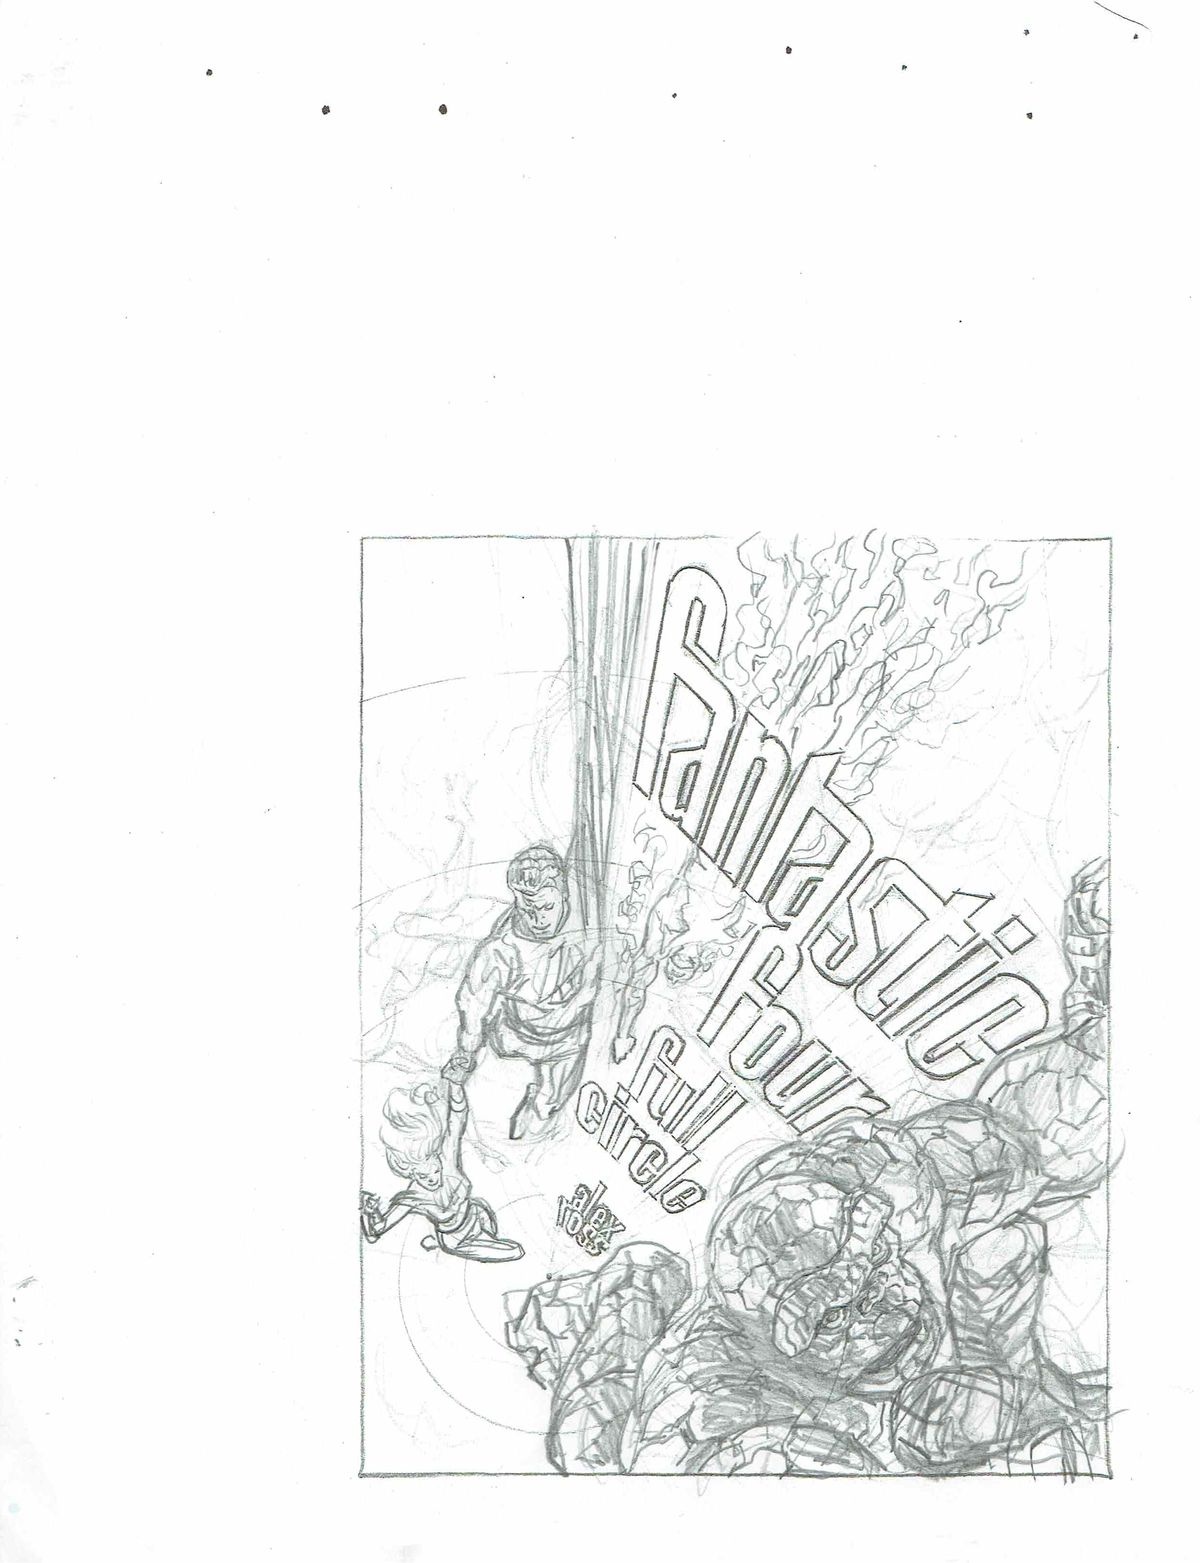 A preliminary sketch of the Fantastic Four in a more dynamic pose on the cover of Fantastic Four: Full Circle